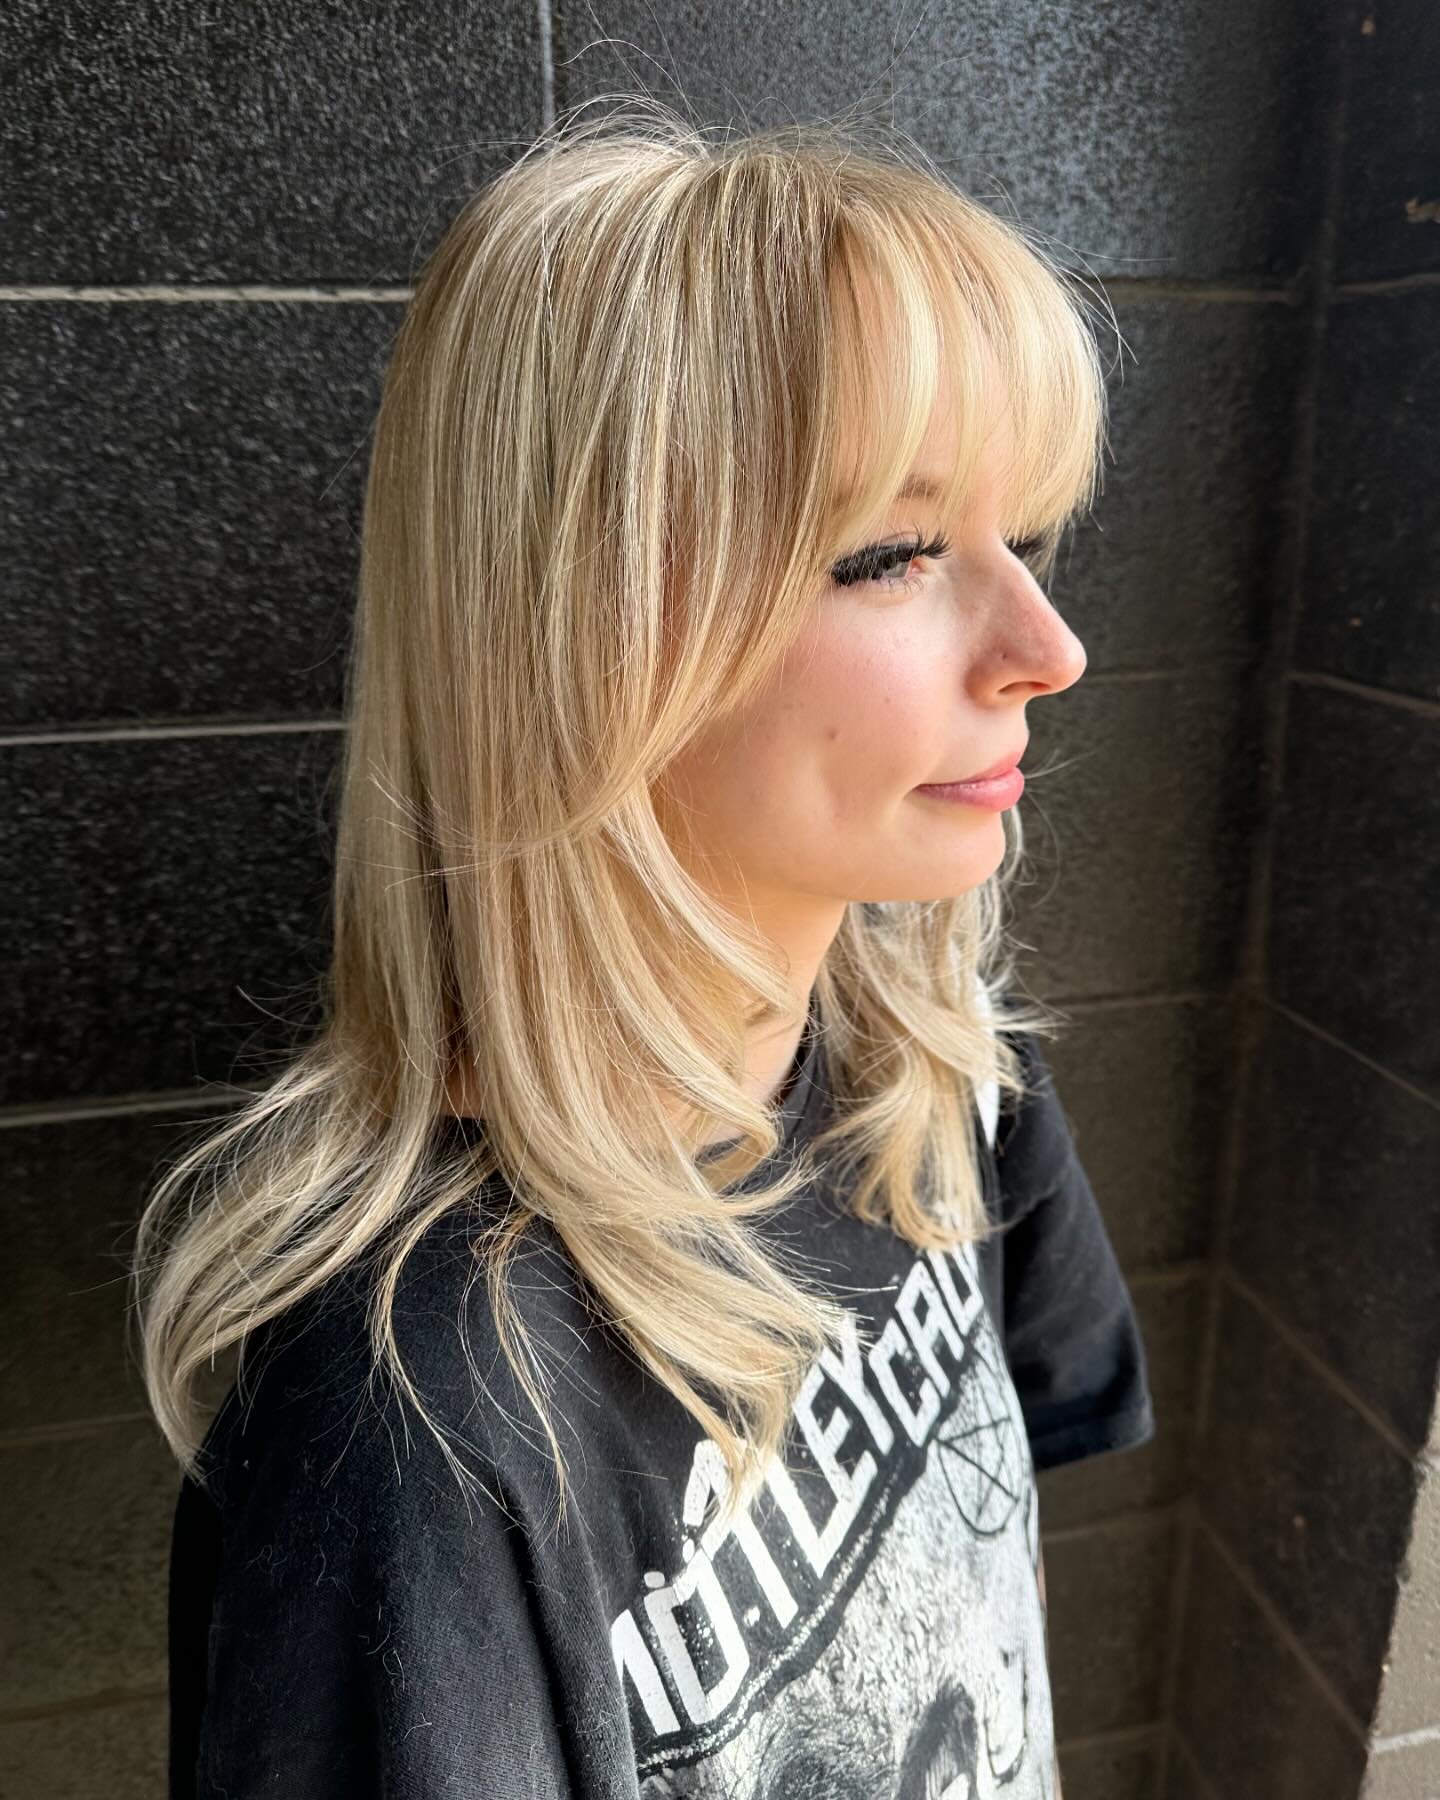 Find out if blondes really do have more fun this summer☀️
LIVING for this colour, haircut and bouncy style. 😍

Done by Kelsie✨